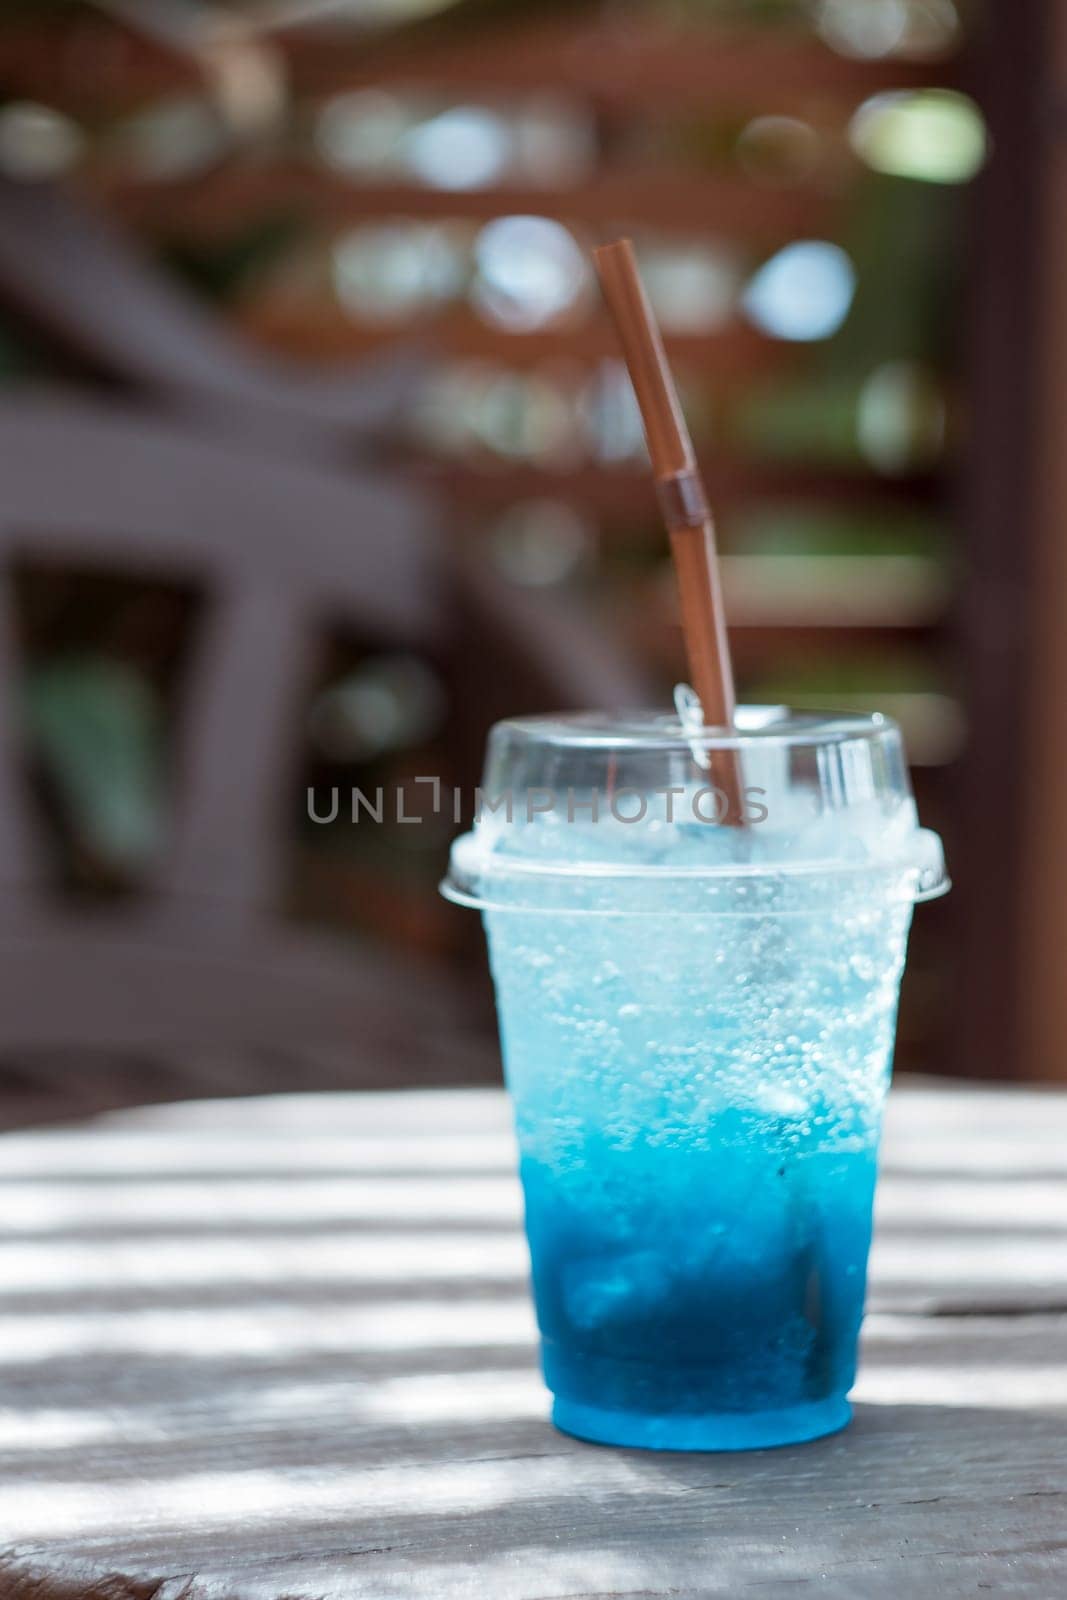 Blue soda in a plastic glass placed on a wooden table